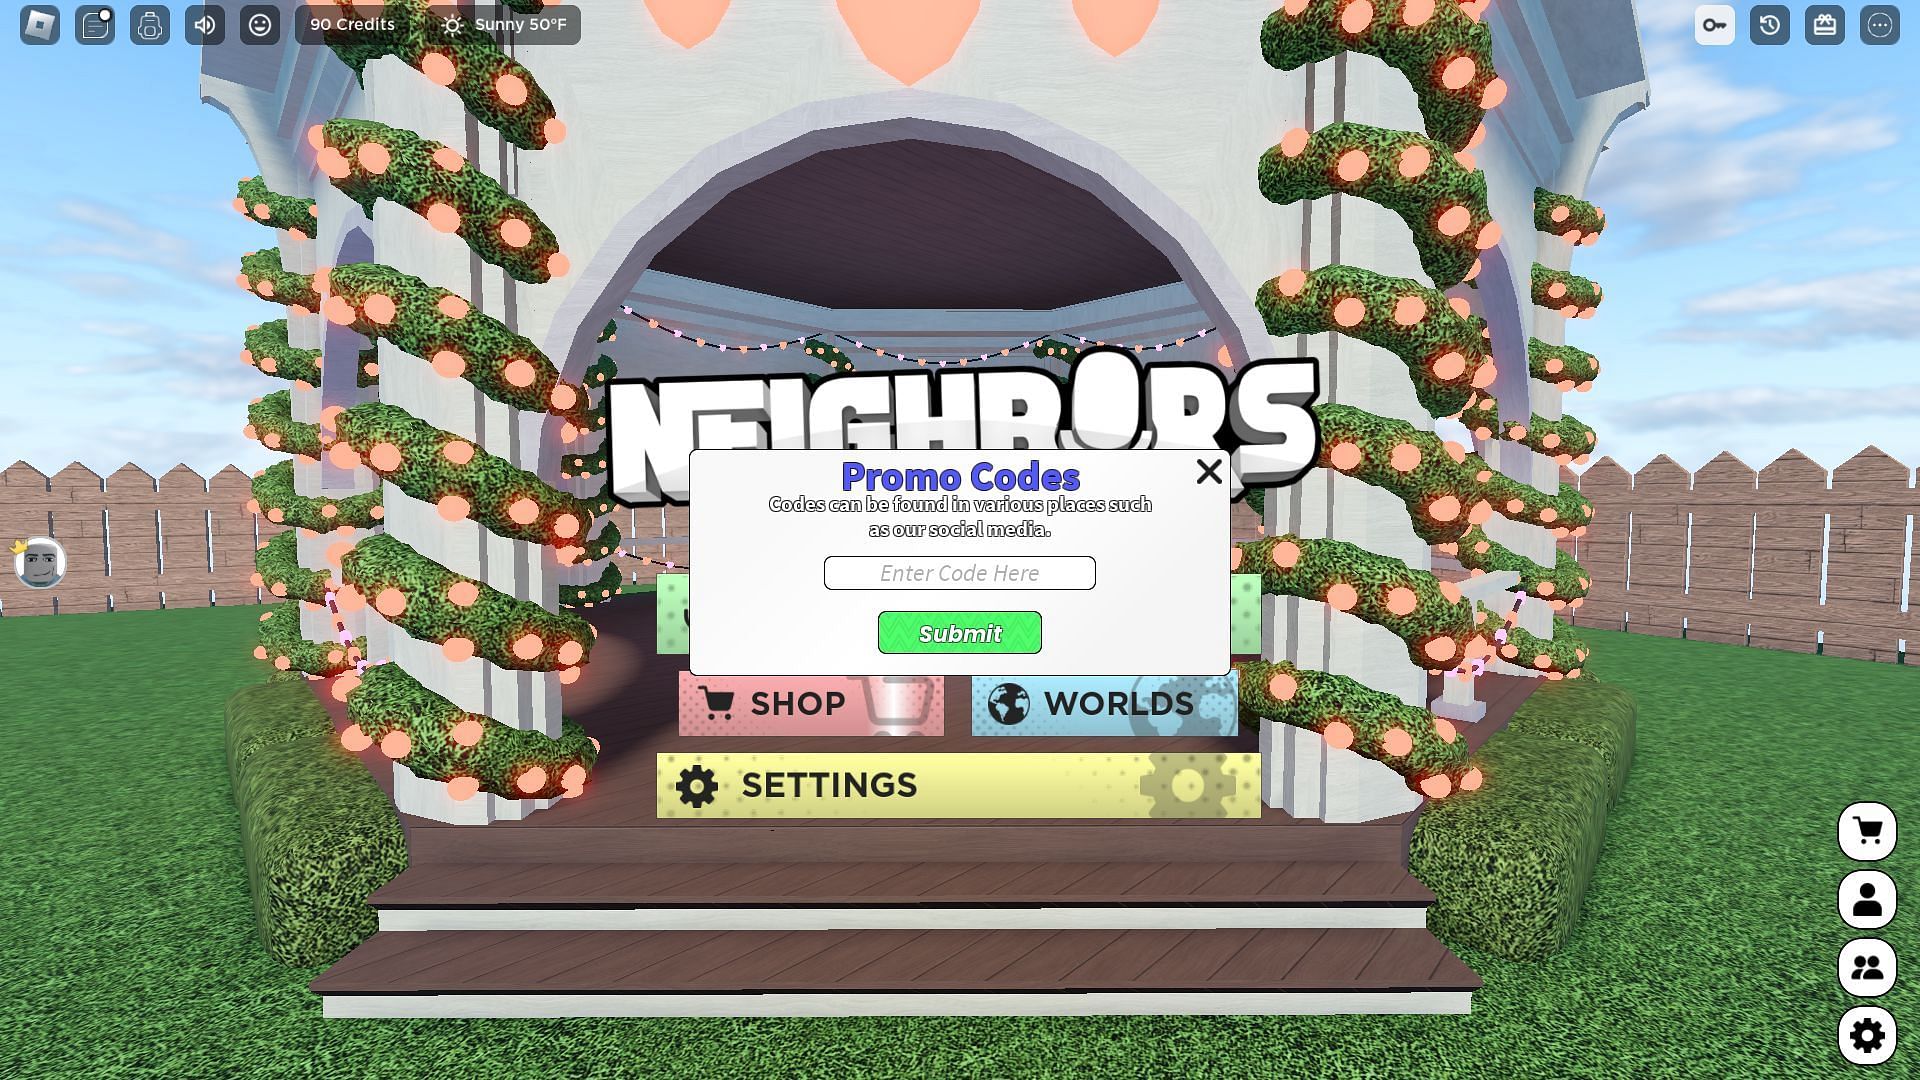 Active codes for Neighbors (Image via Roblox)